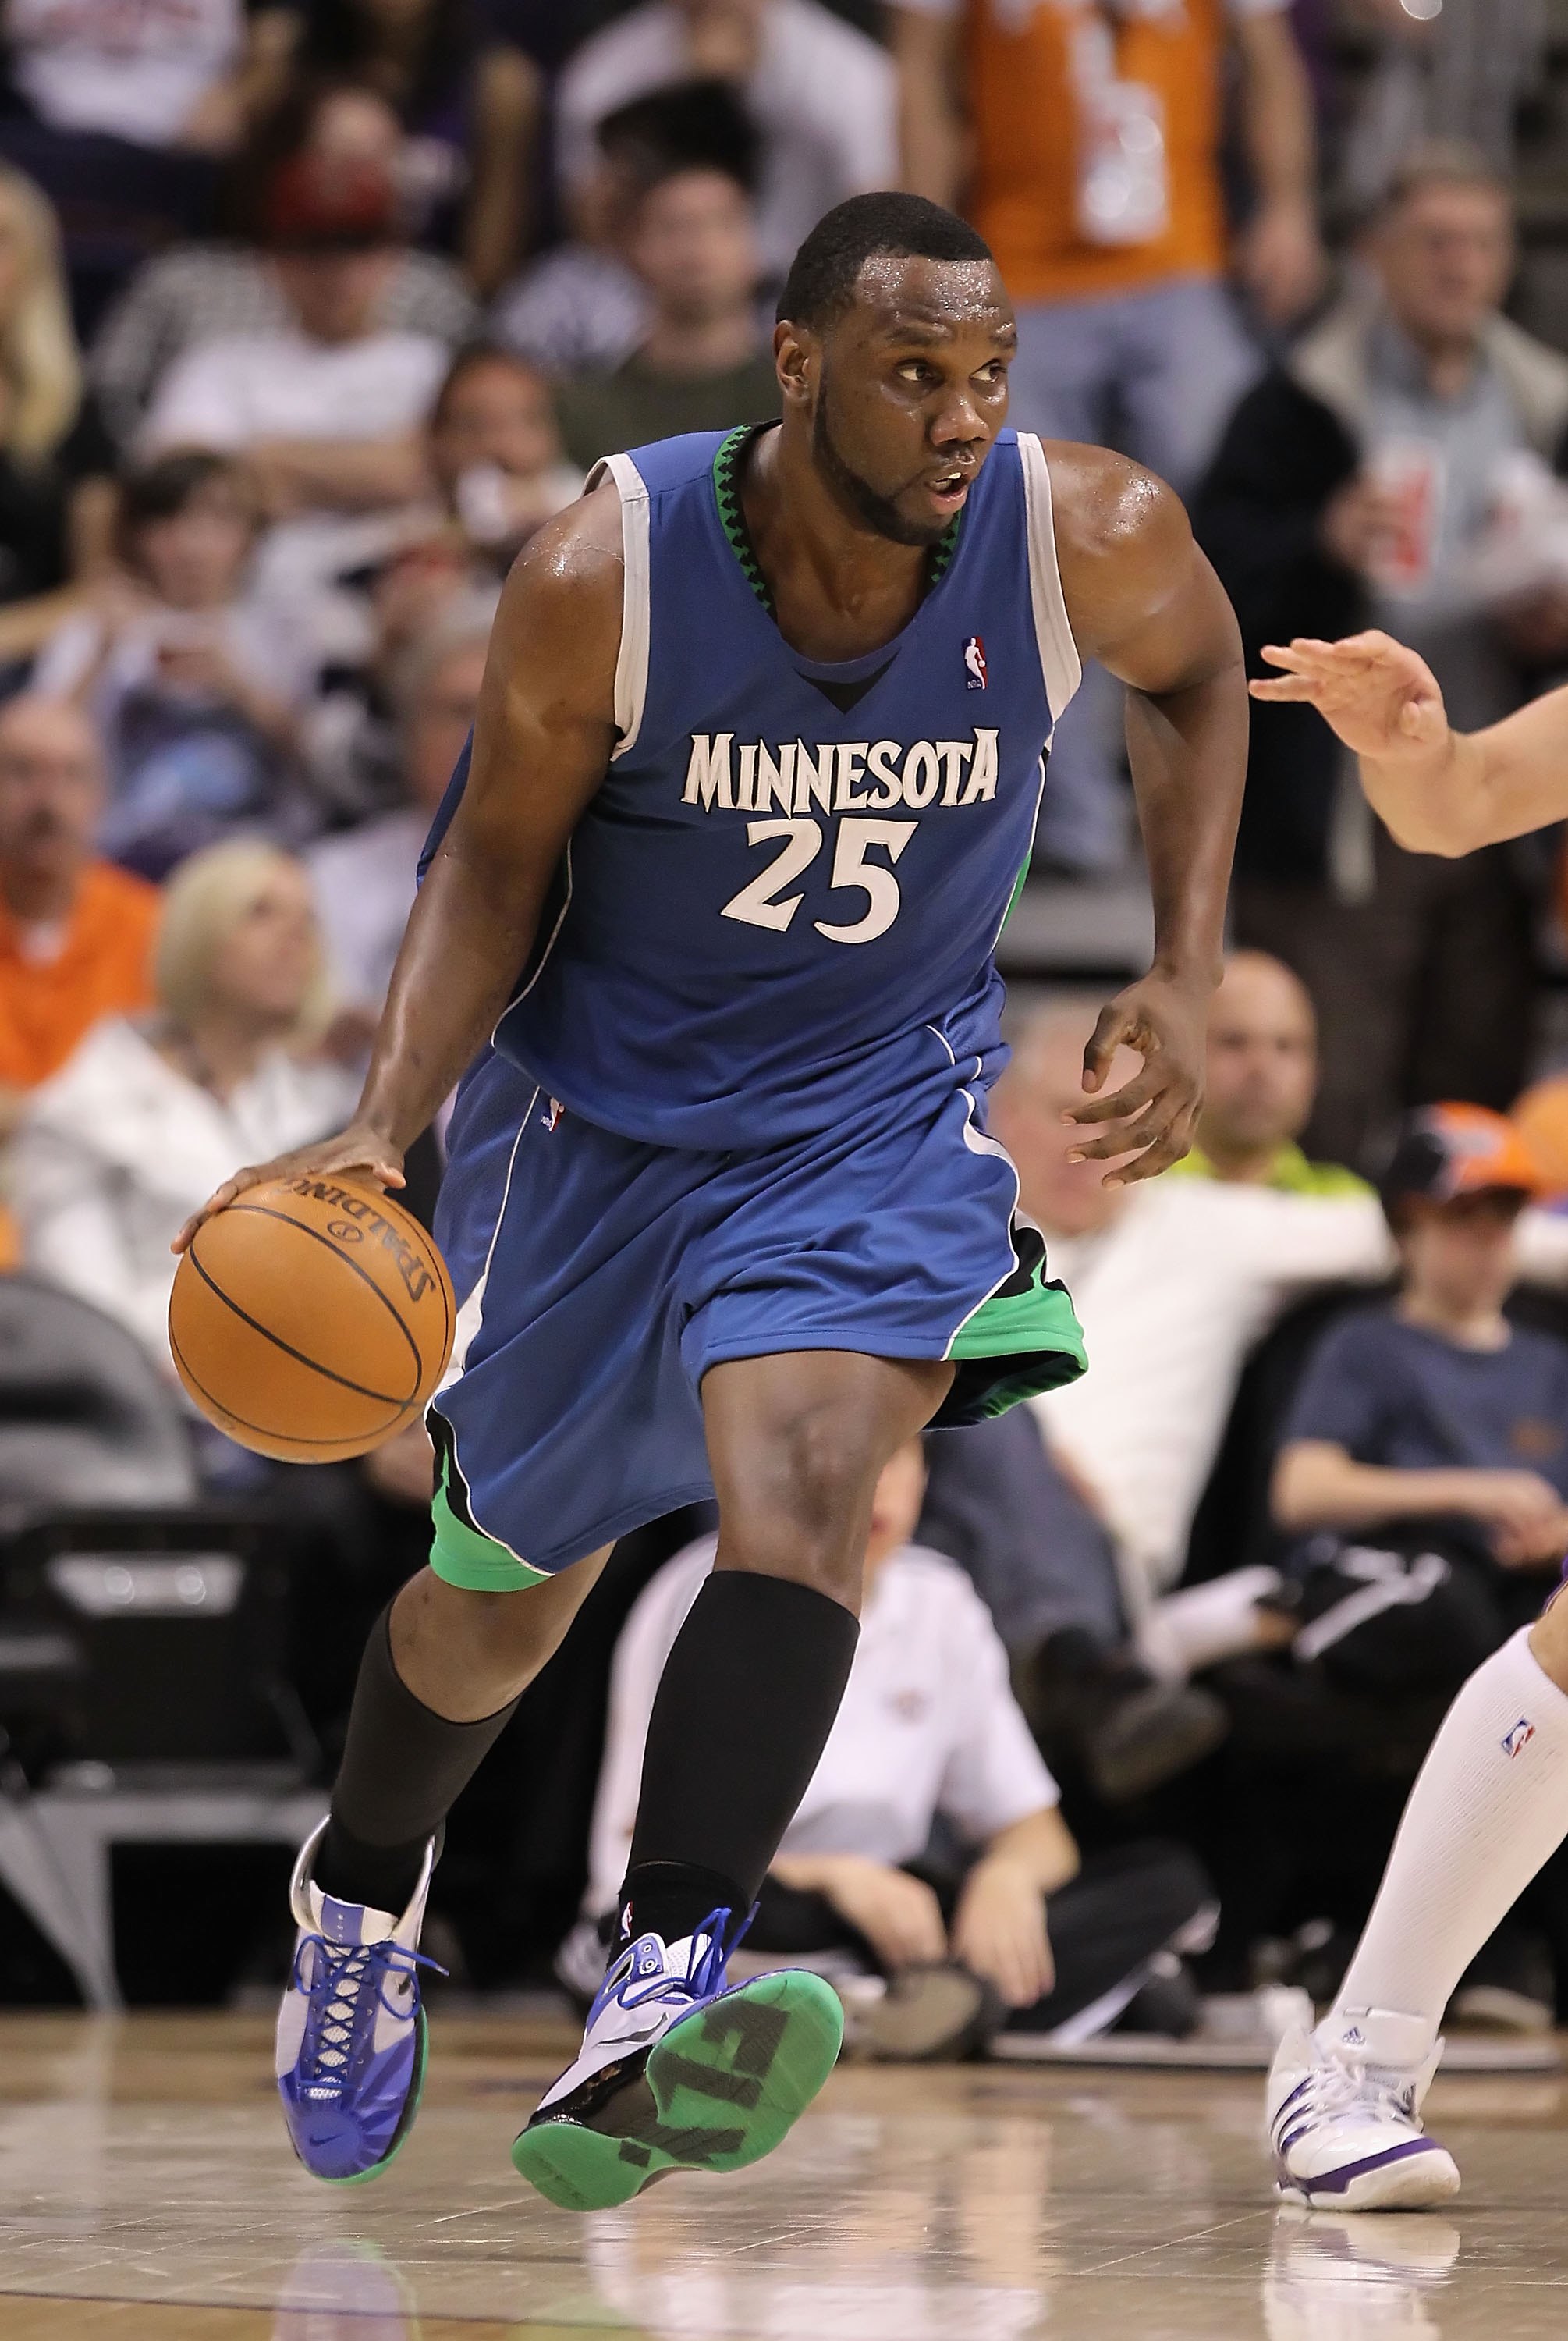 PHOENIX - MARCH 16:  Al Jefferson #25 of the Minnesota Timberwolves handles the ball during the NBA game against the Phoenix Suns at US Airways Center on March 16, 2010 in Phoenix, Arizona. The Suns defeated the Timberwolves 152-114.  NOTE TO USER: User e